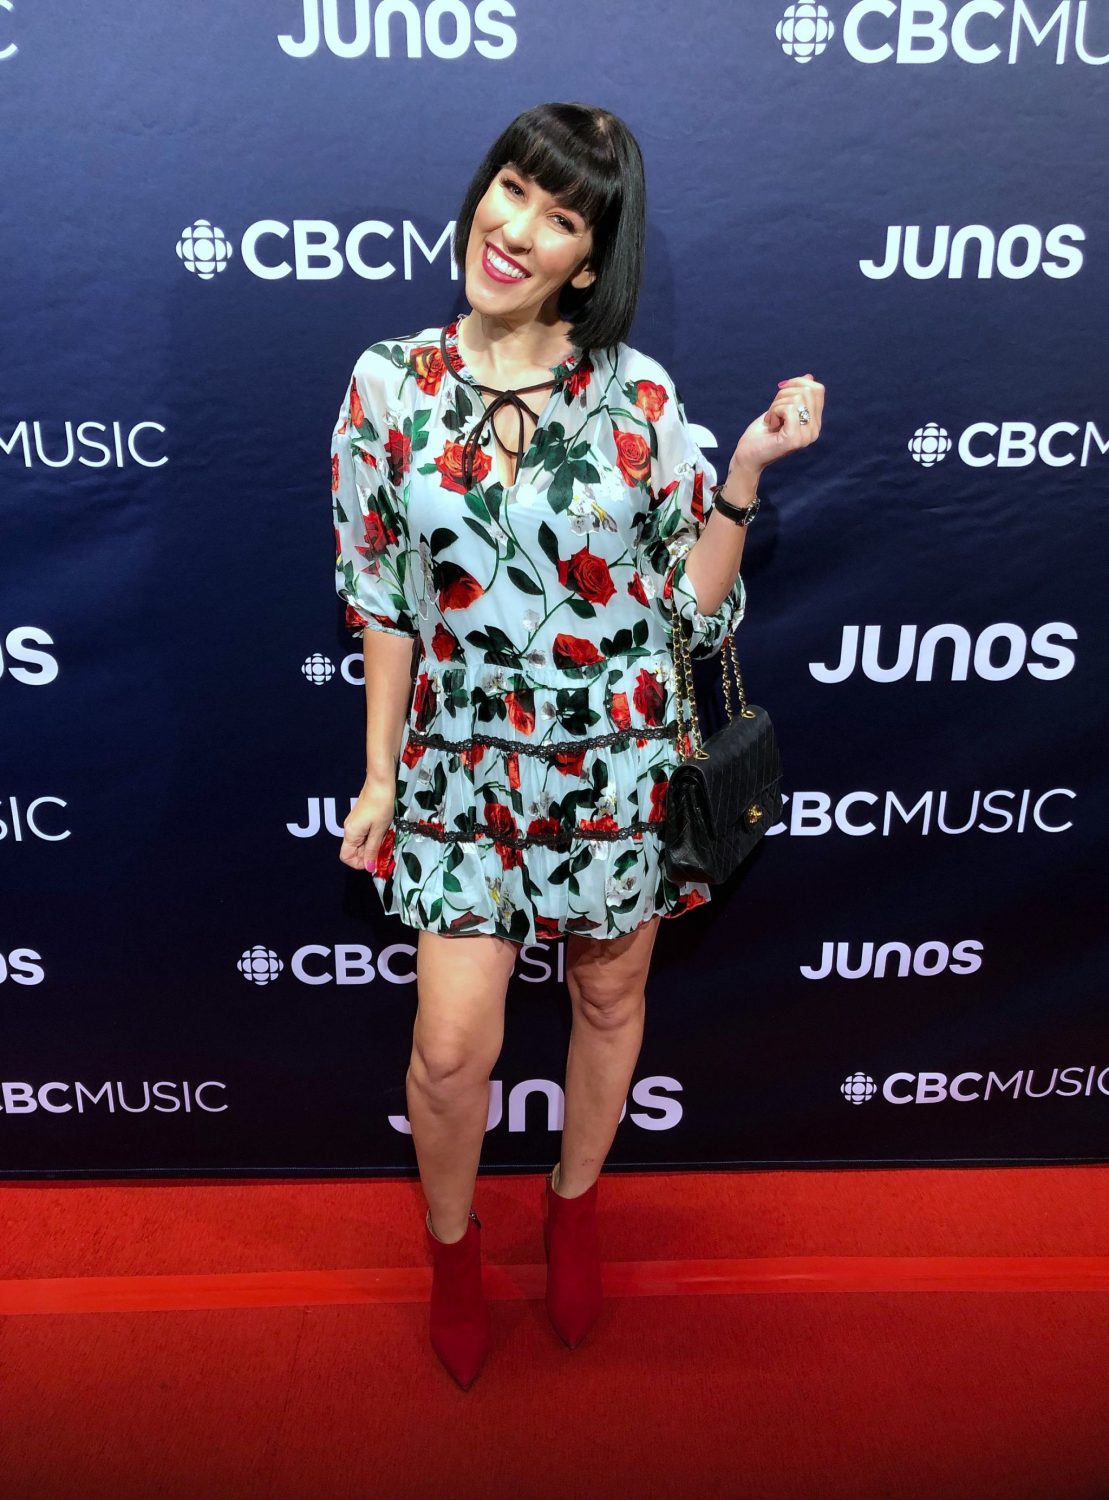 Red Carpet at the Junos 2019 in London ON | The Pink Millennial